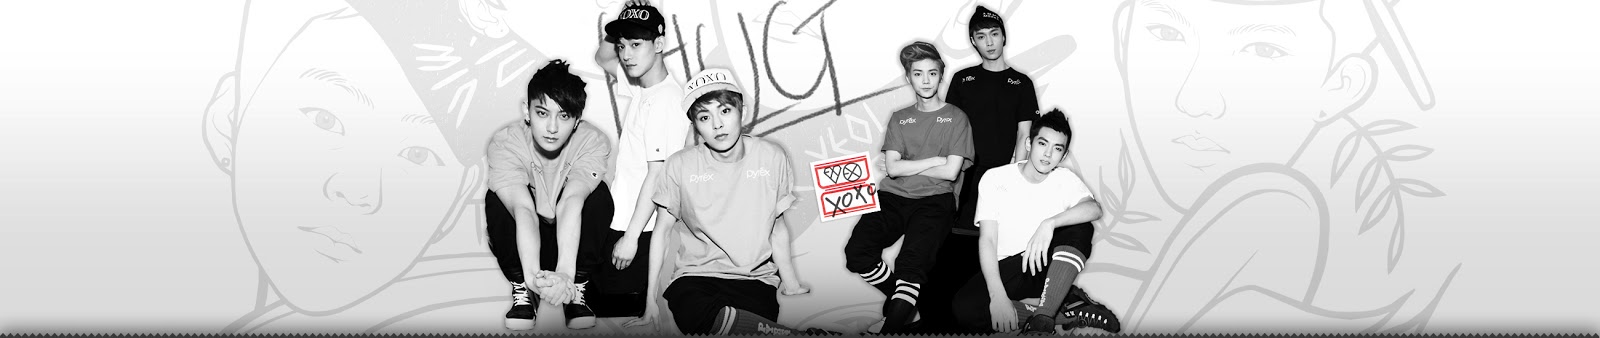 Dhictator Blog's: EXO - XOXO Official Background
